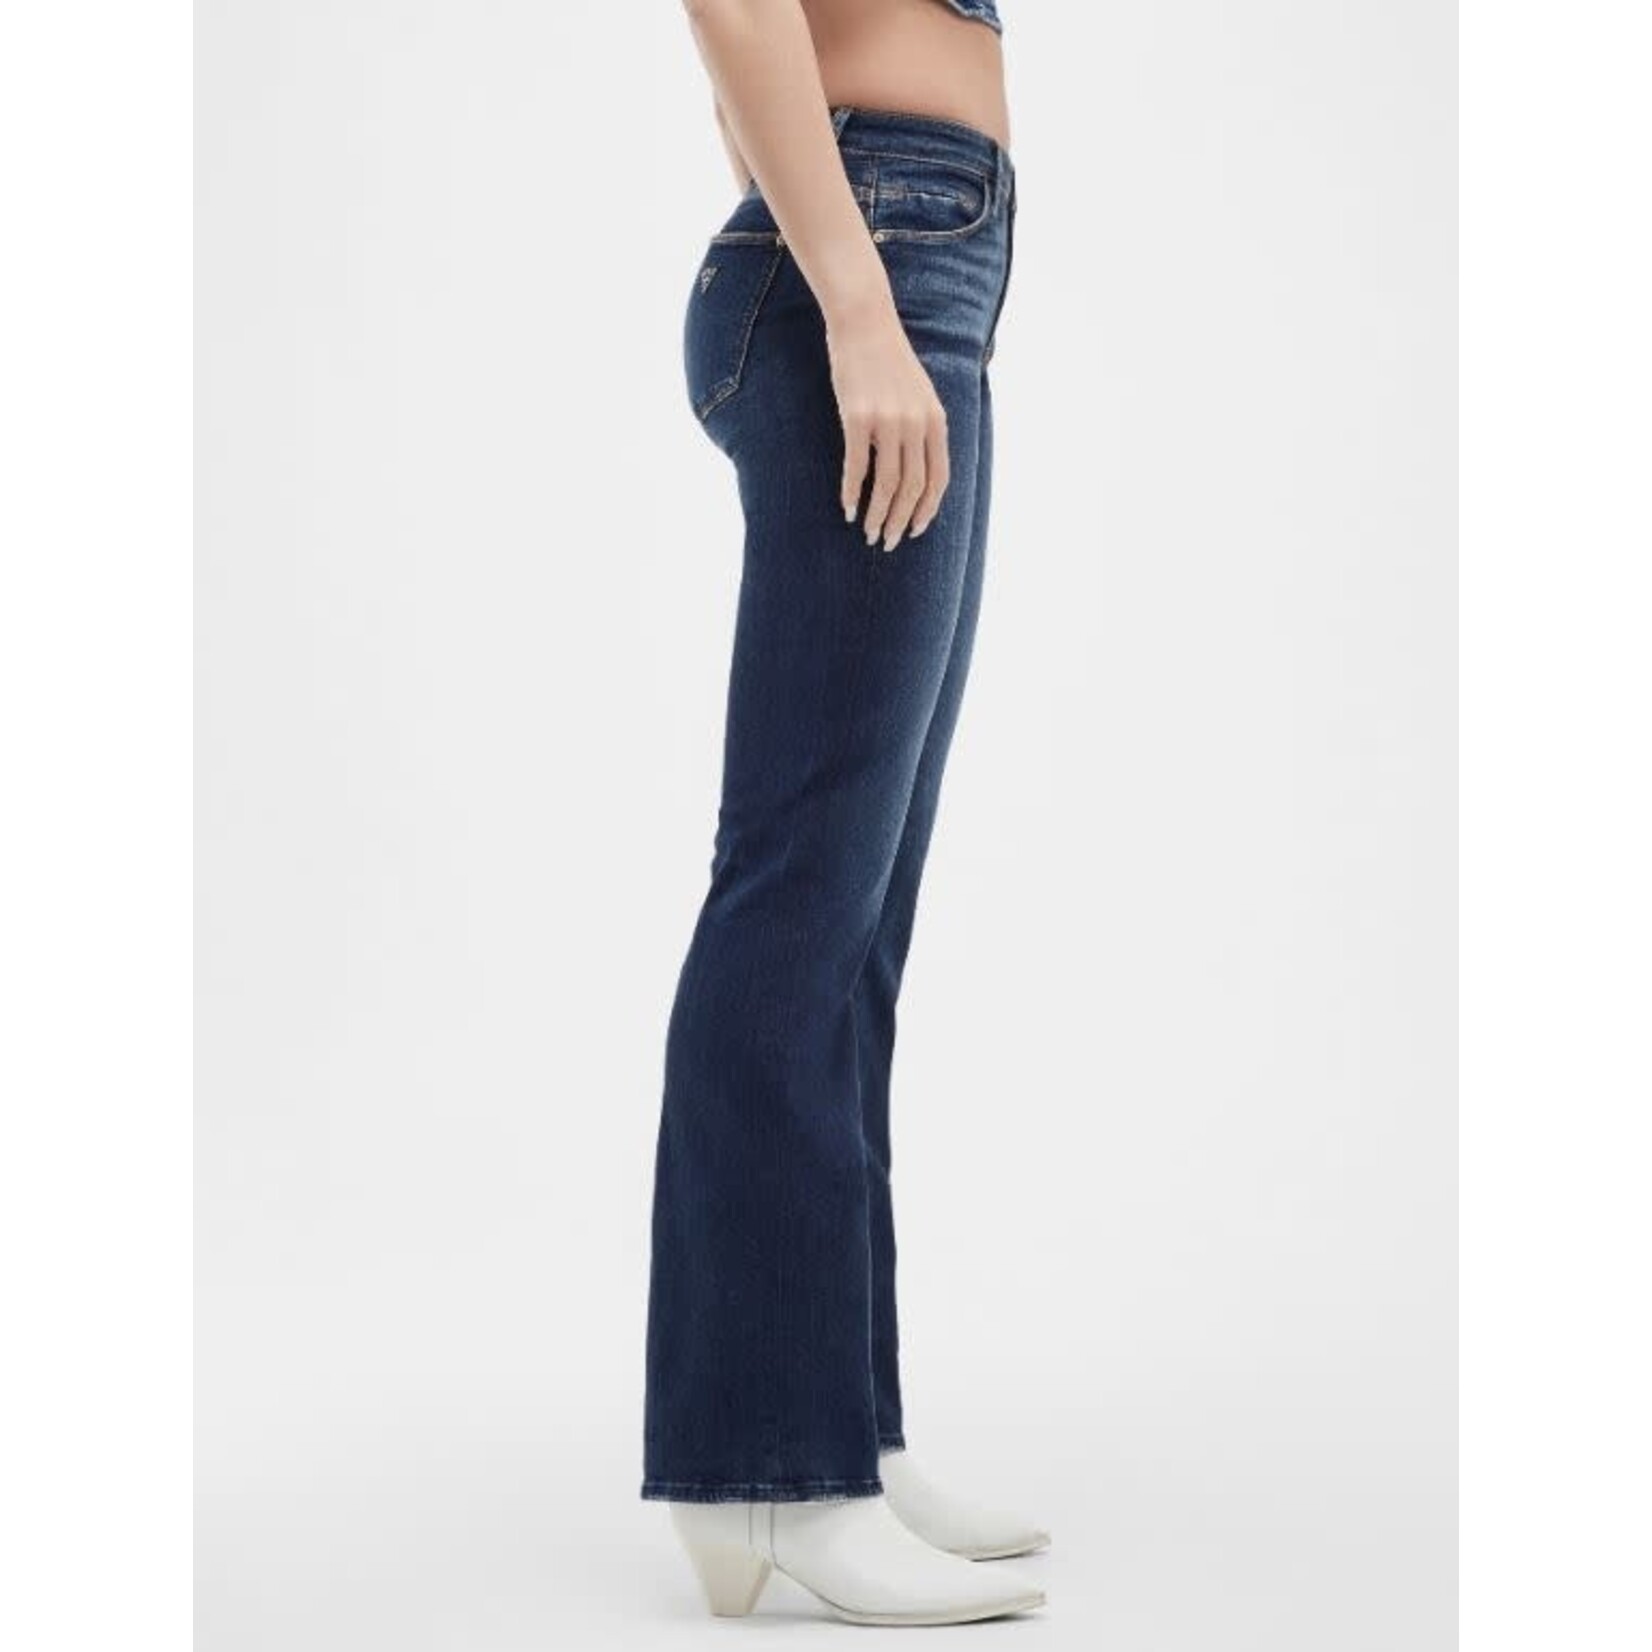 Guess Sexy Boot Jean